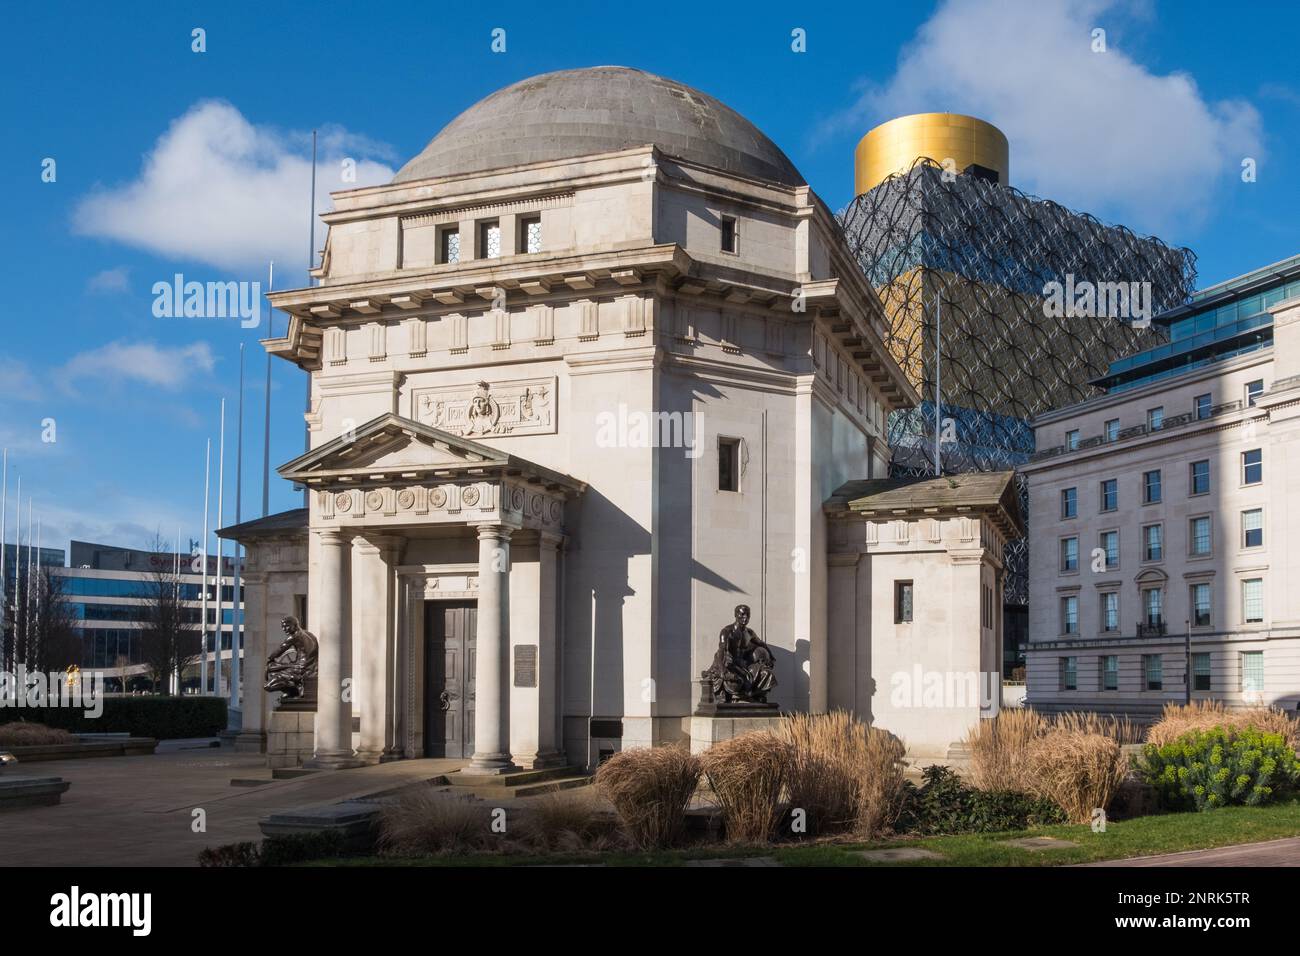 The Hall of Memory in Centenary Square, Birmingham is a war memorial built in 1925 to remember Birmingham citizens who died in WW! Stock Photo